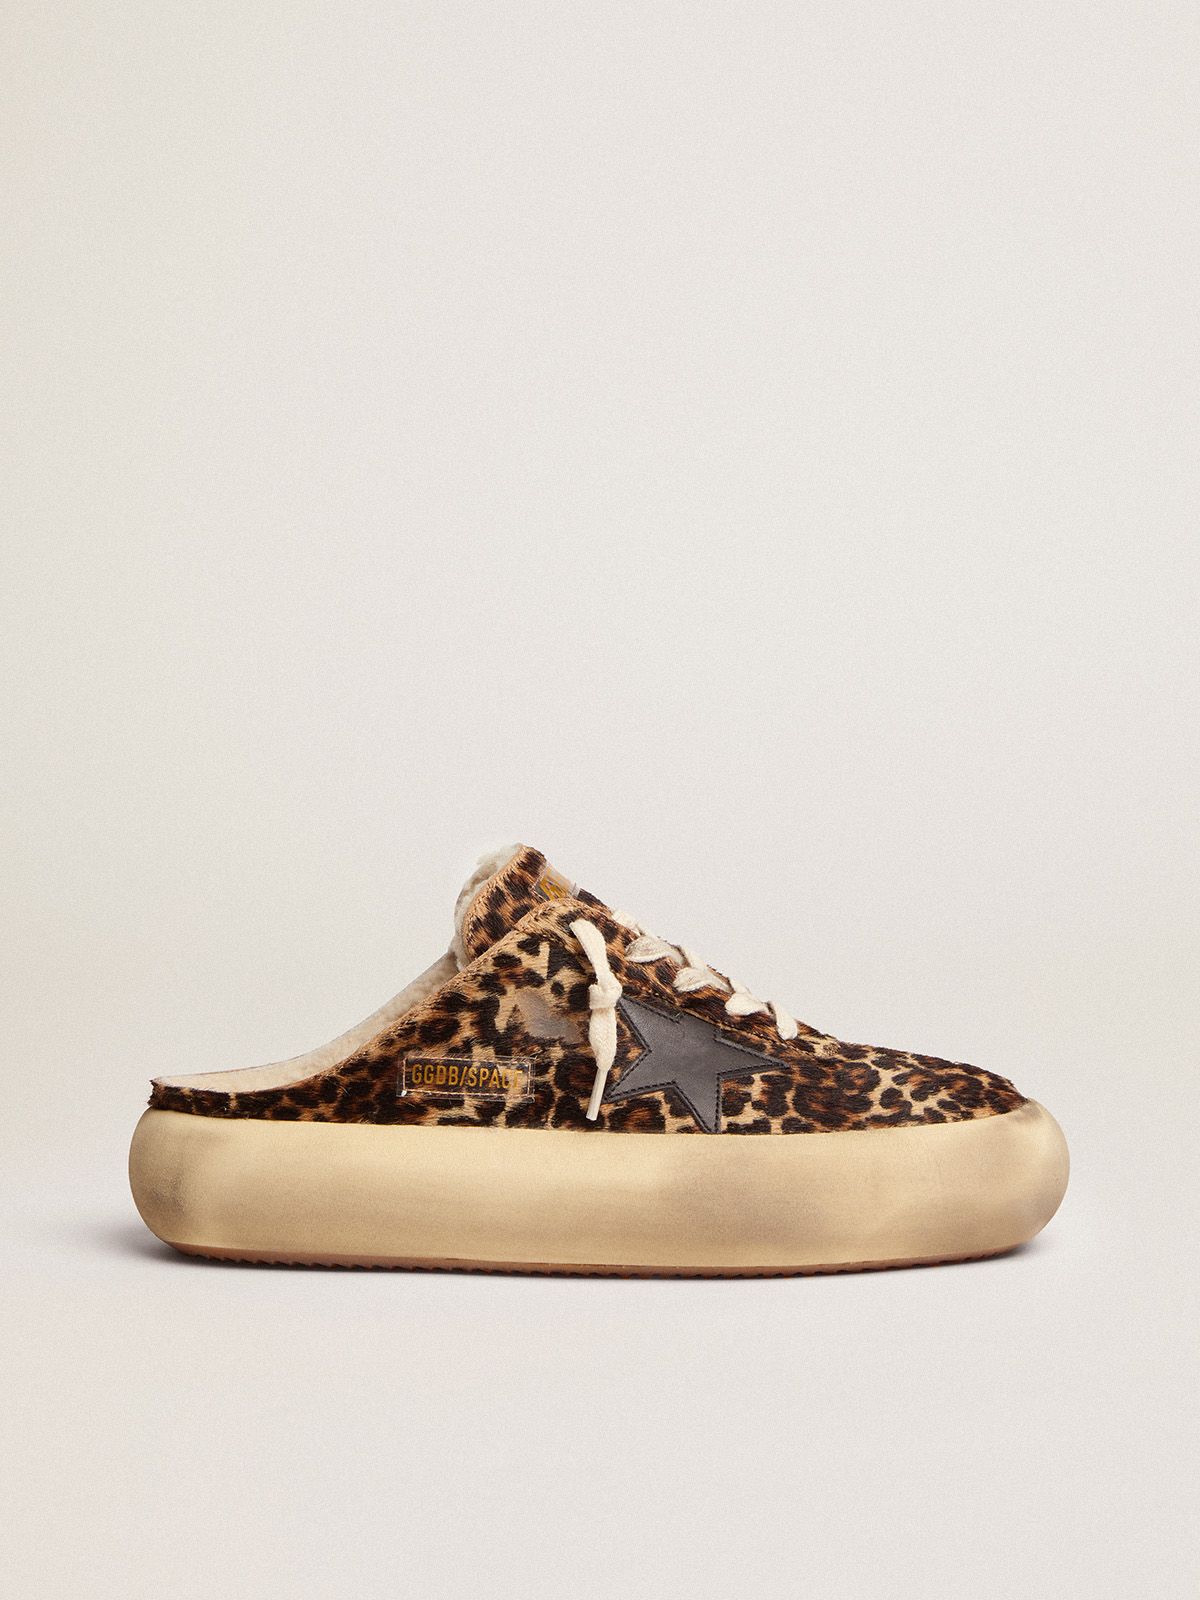 Golden Goose Saldi Space-Star Sabot shoes in animal-print pony skin with shearling lining